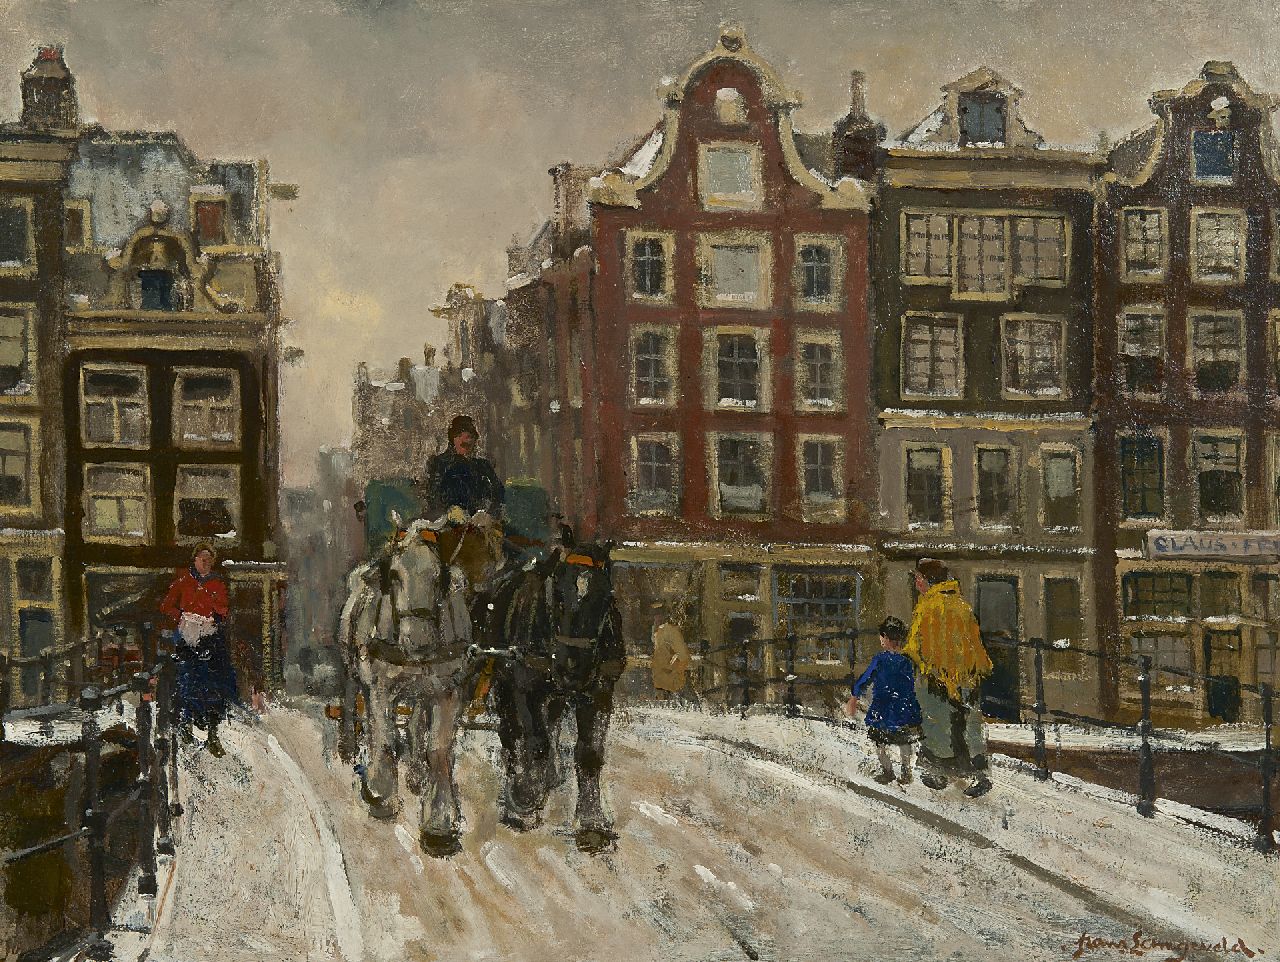 Langeveld F.A.  | Franciscus Arnoldus 'Frans' Langeveld, Horse and wagon on a snowy bridge, Amsterdam, oil on canvas 51.3 x 66.3 cm, signed l.r.